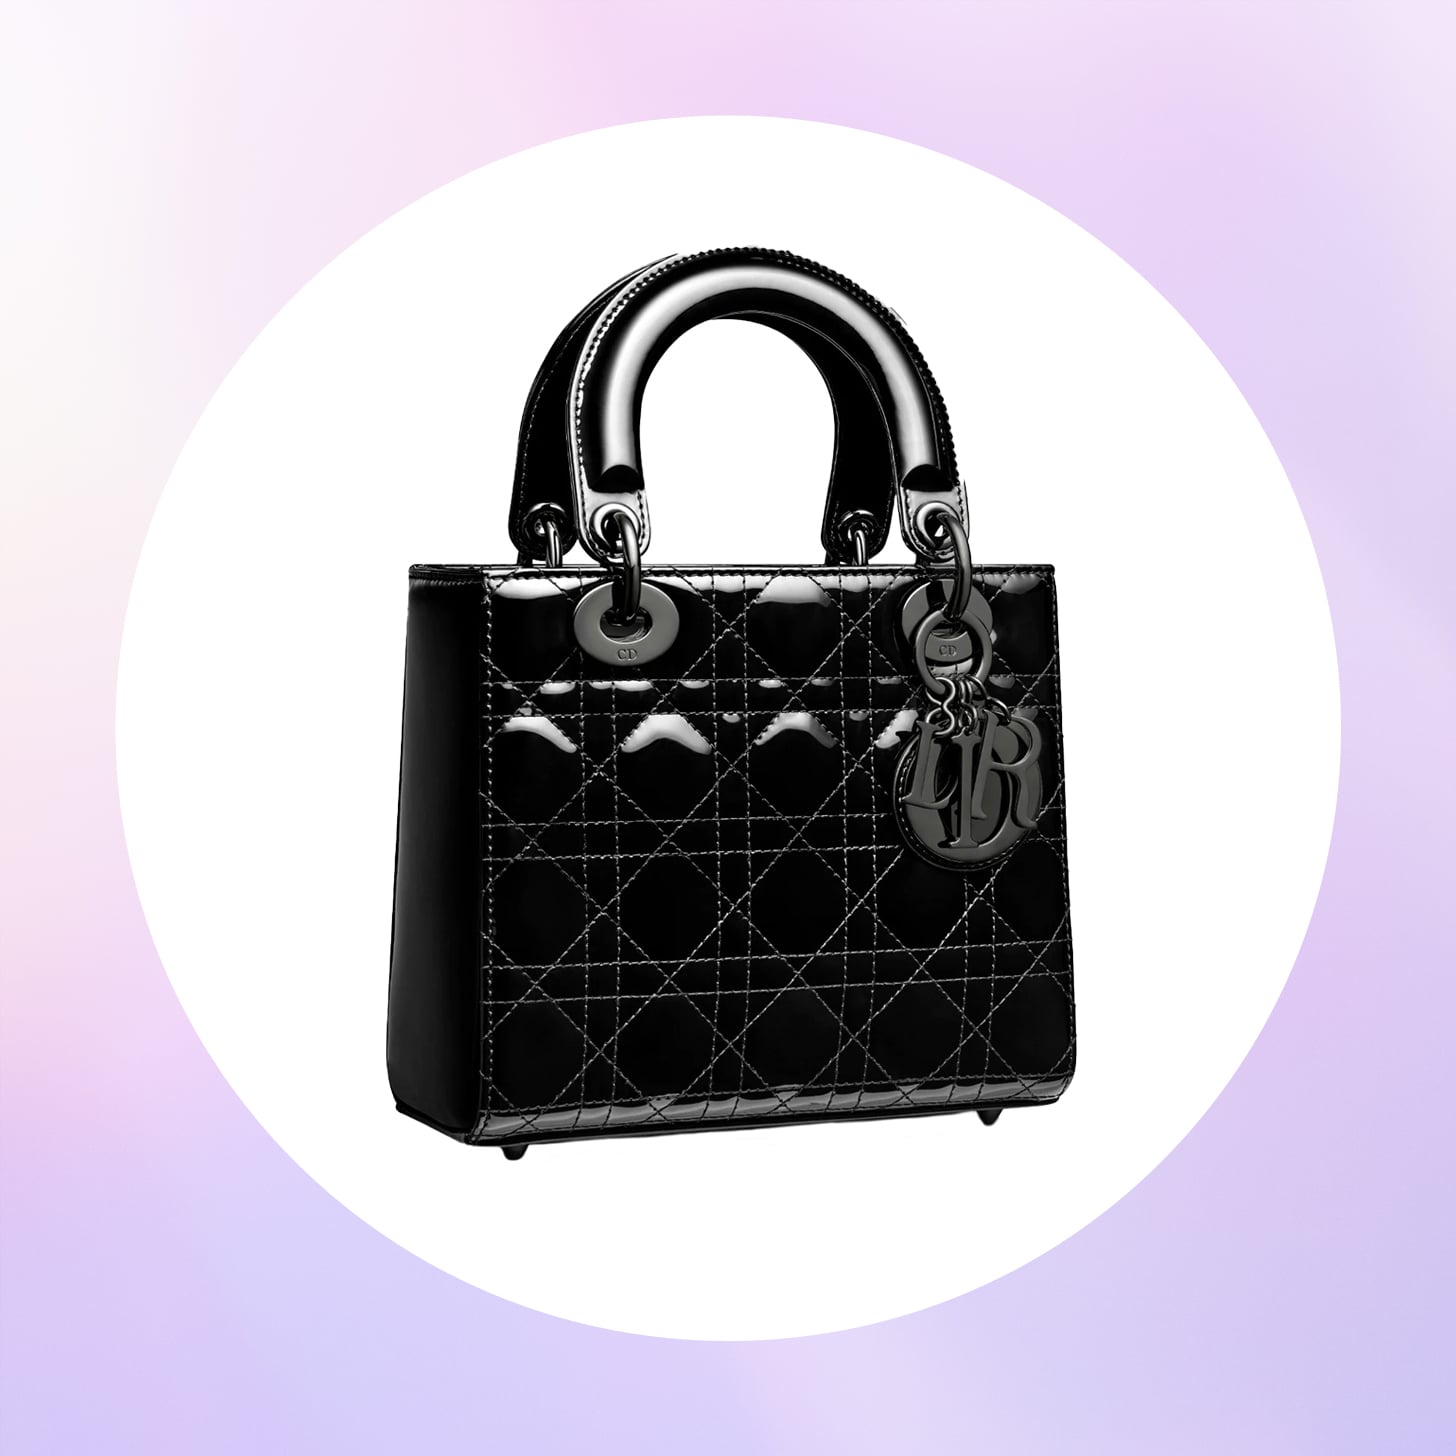 New Small Lady Dior Bag From Cruise 2017  Spotted Fashion